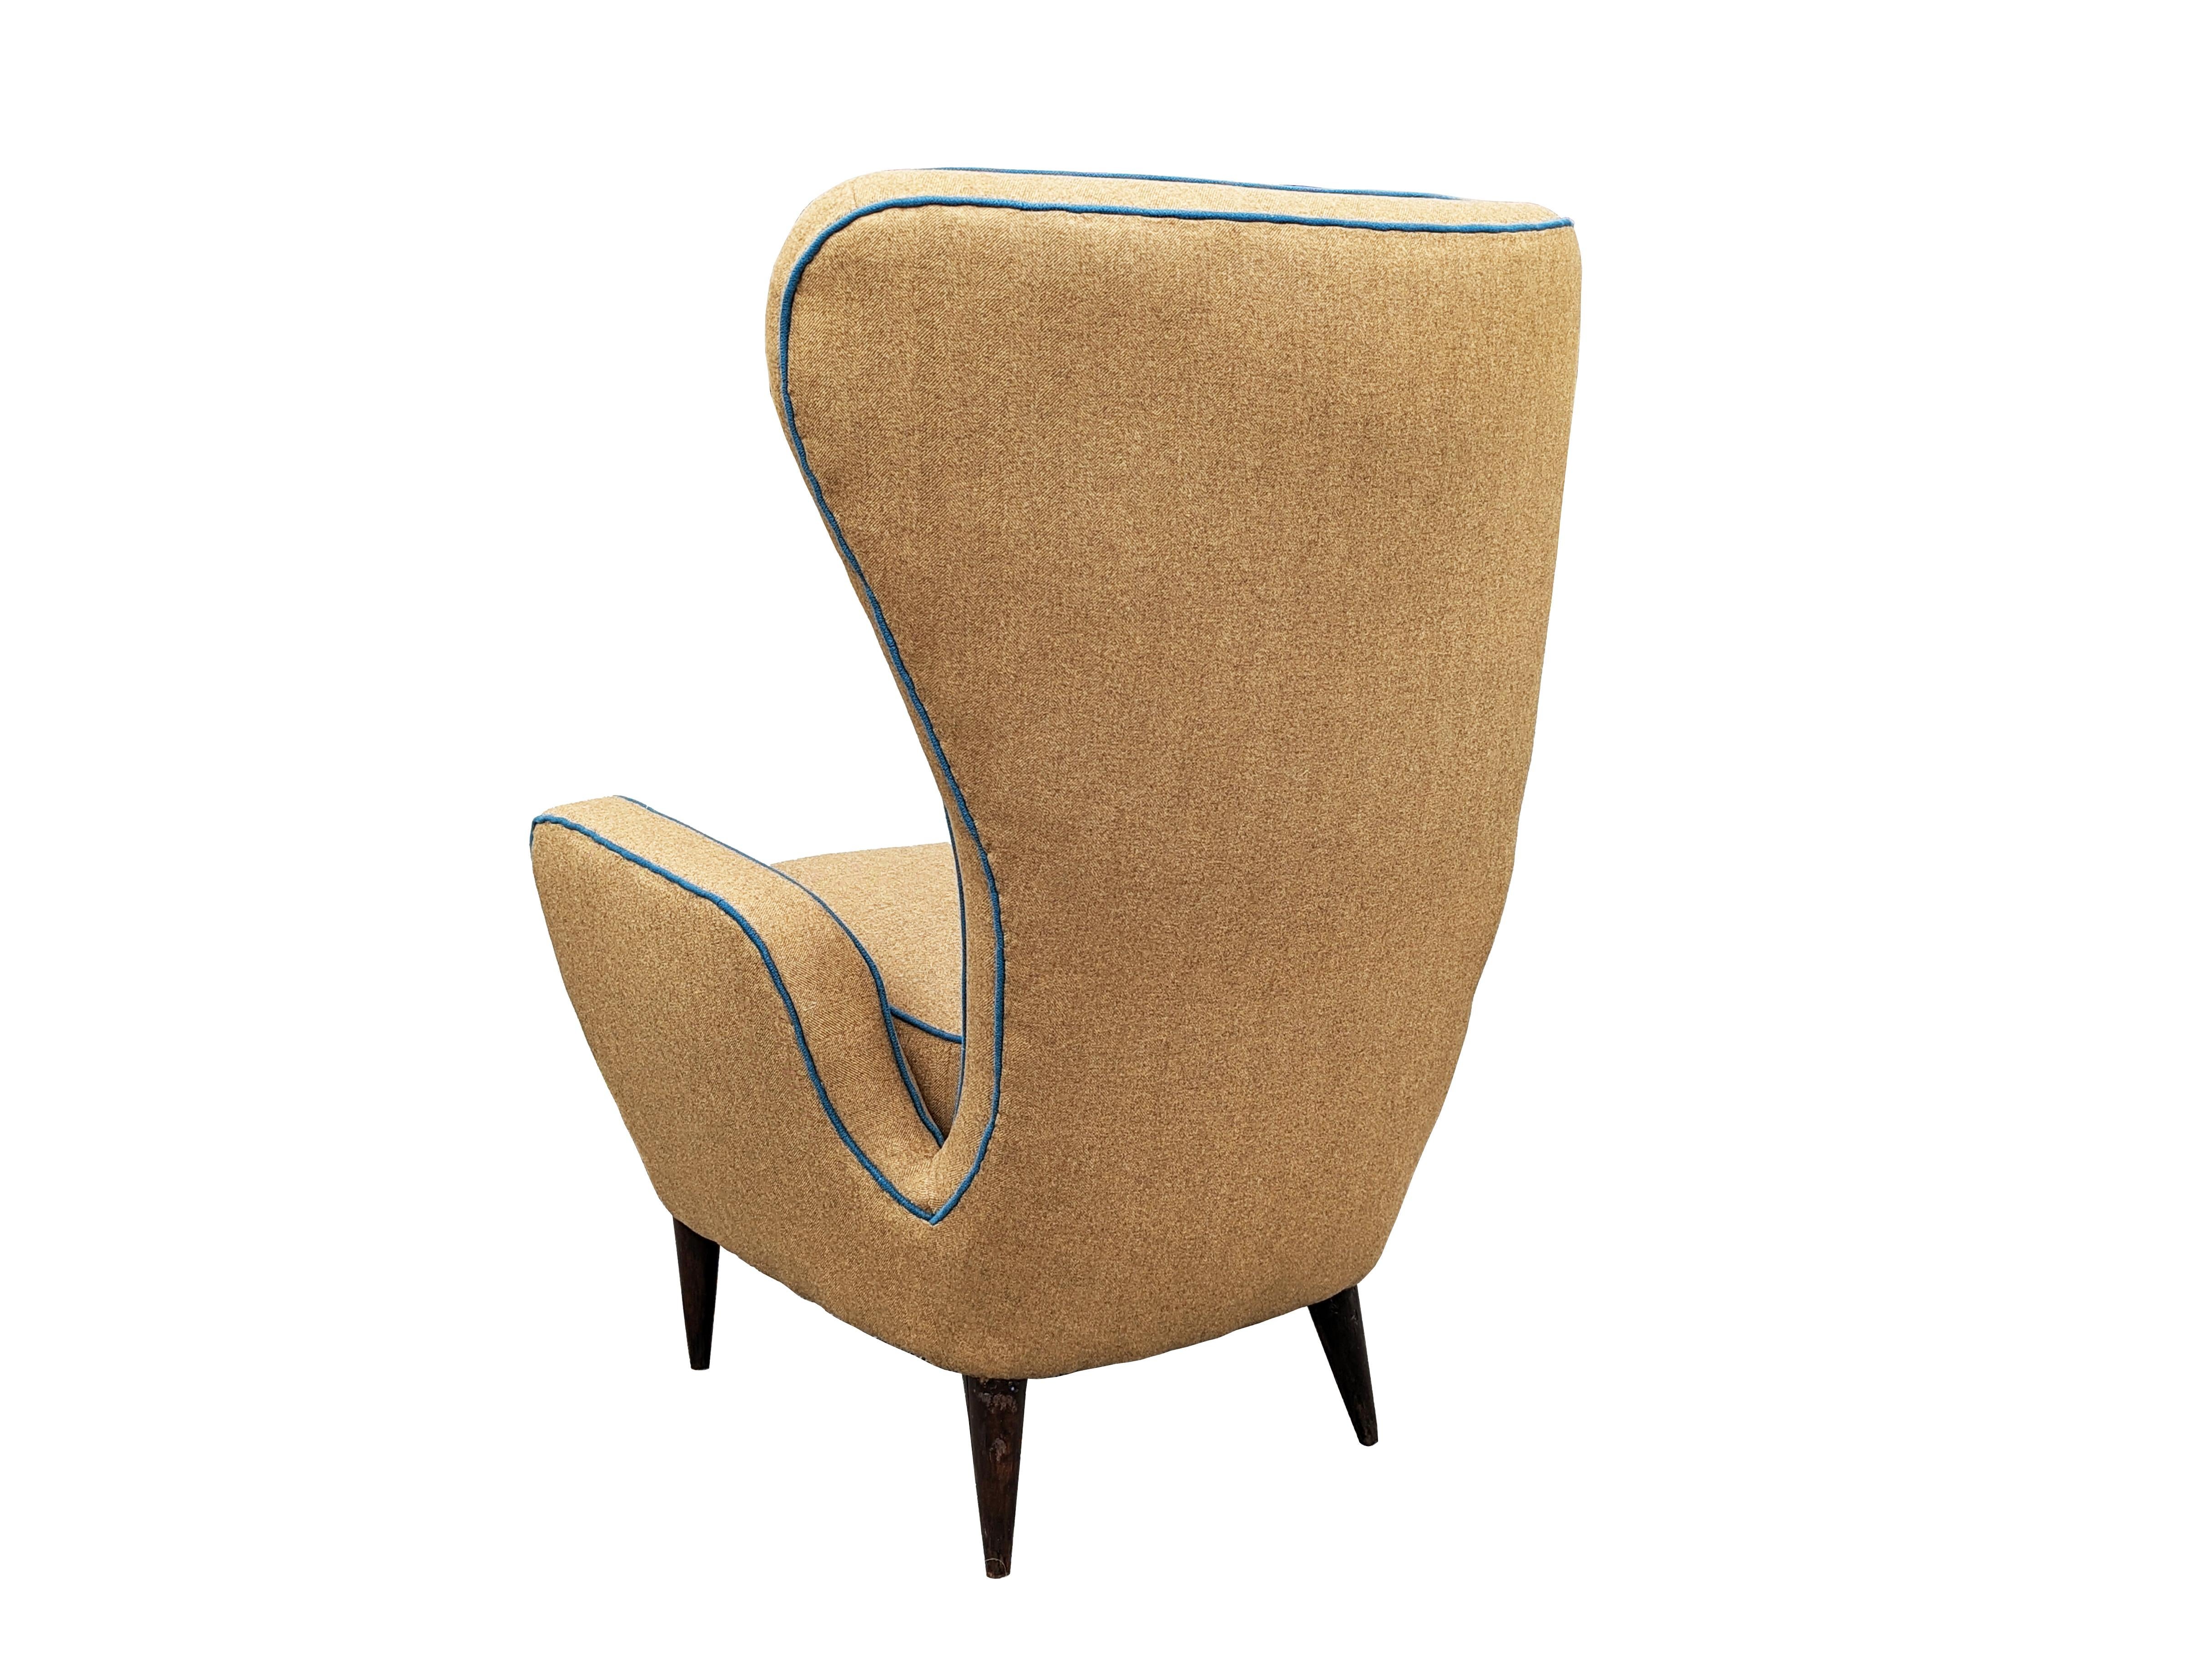 Teal & brown fabric 1950s highback armchair by Sala & Madini for Galimberti  For Sale 3